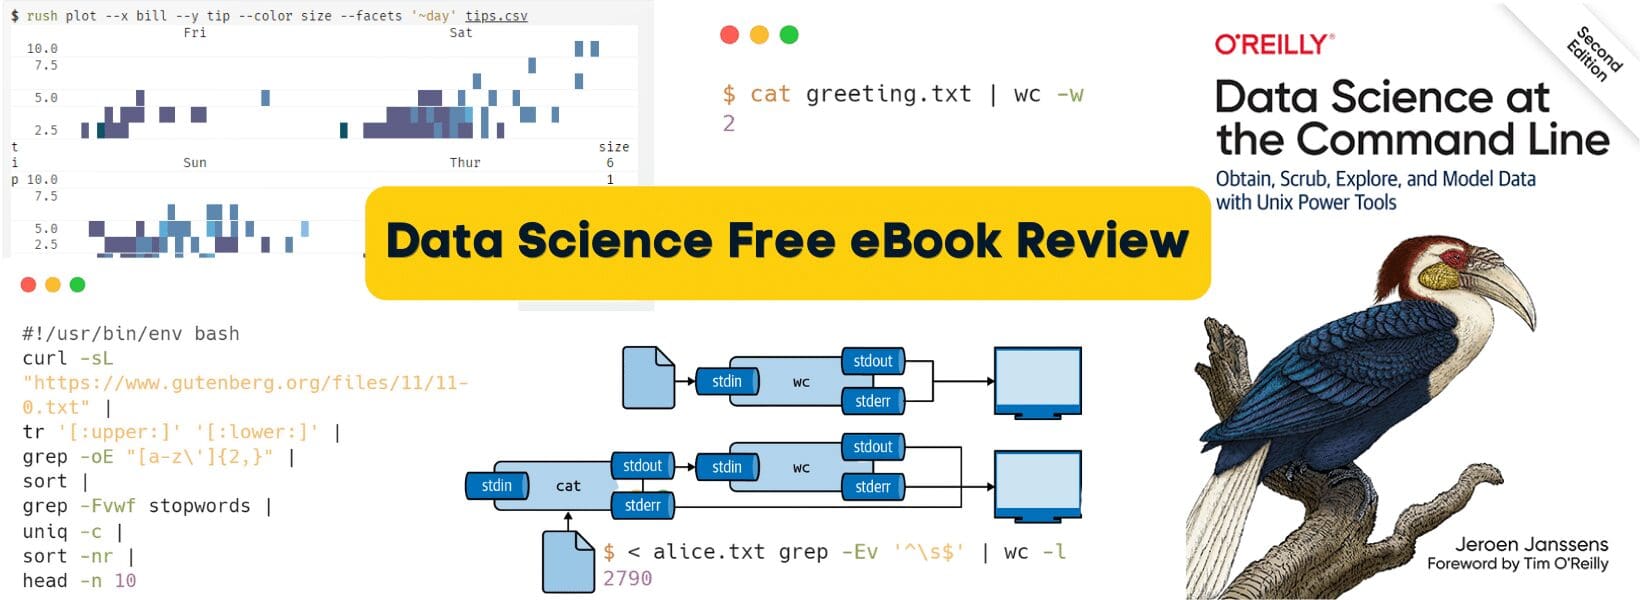 Data Science at the Command Line: The Free eBook